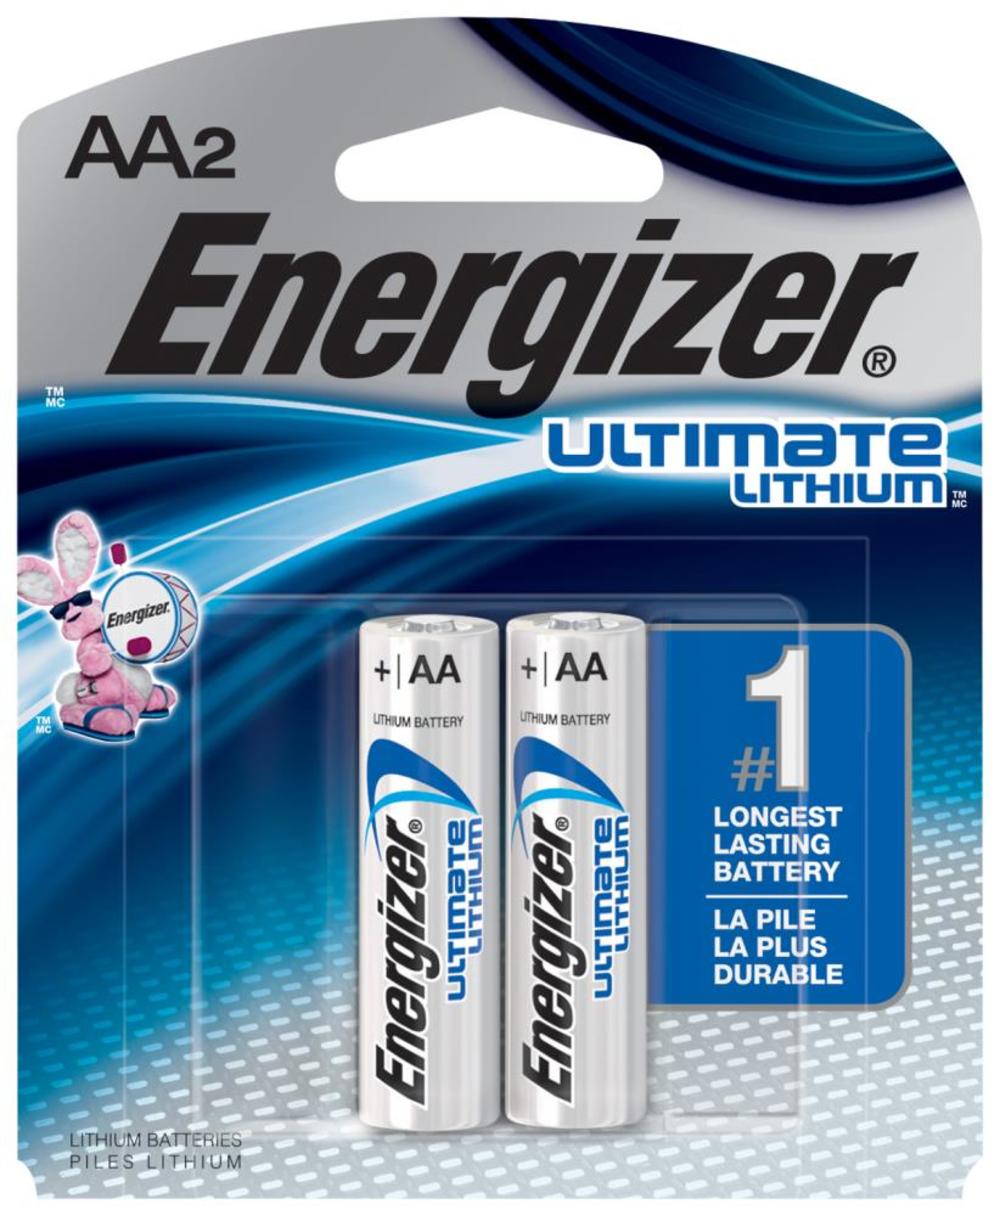 Energizer Ultimate Lithium AA Batteries (2 Pack), Double A Batteries